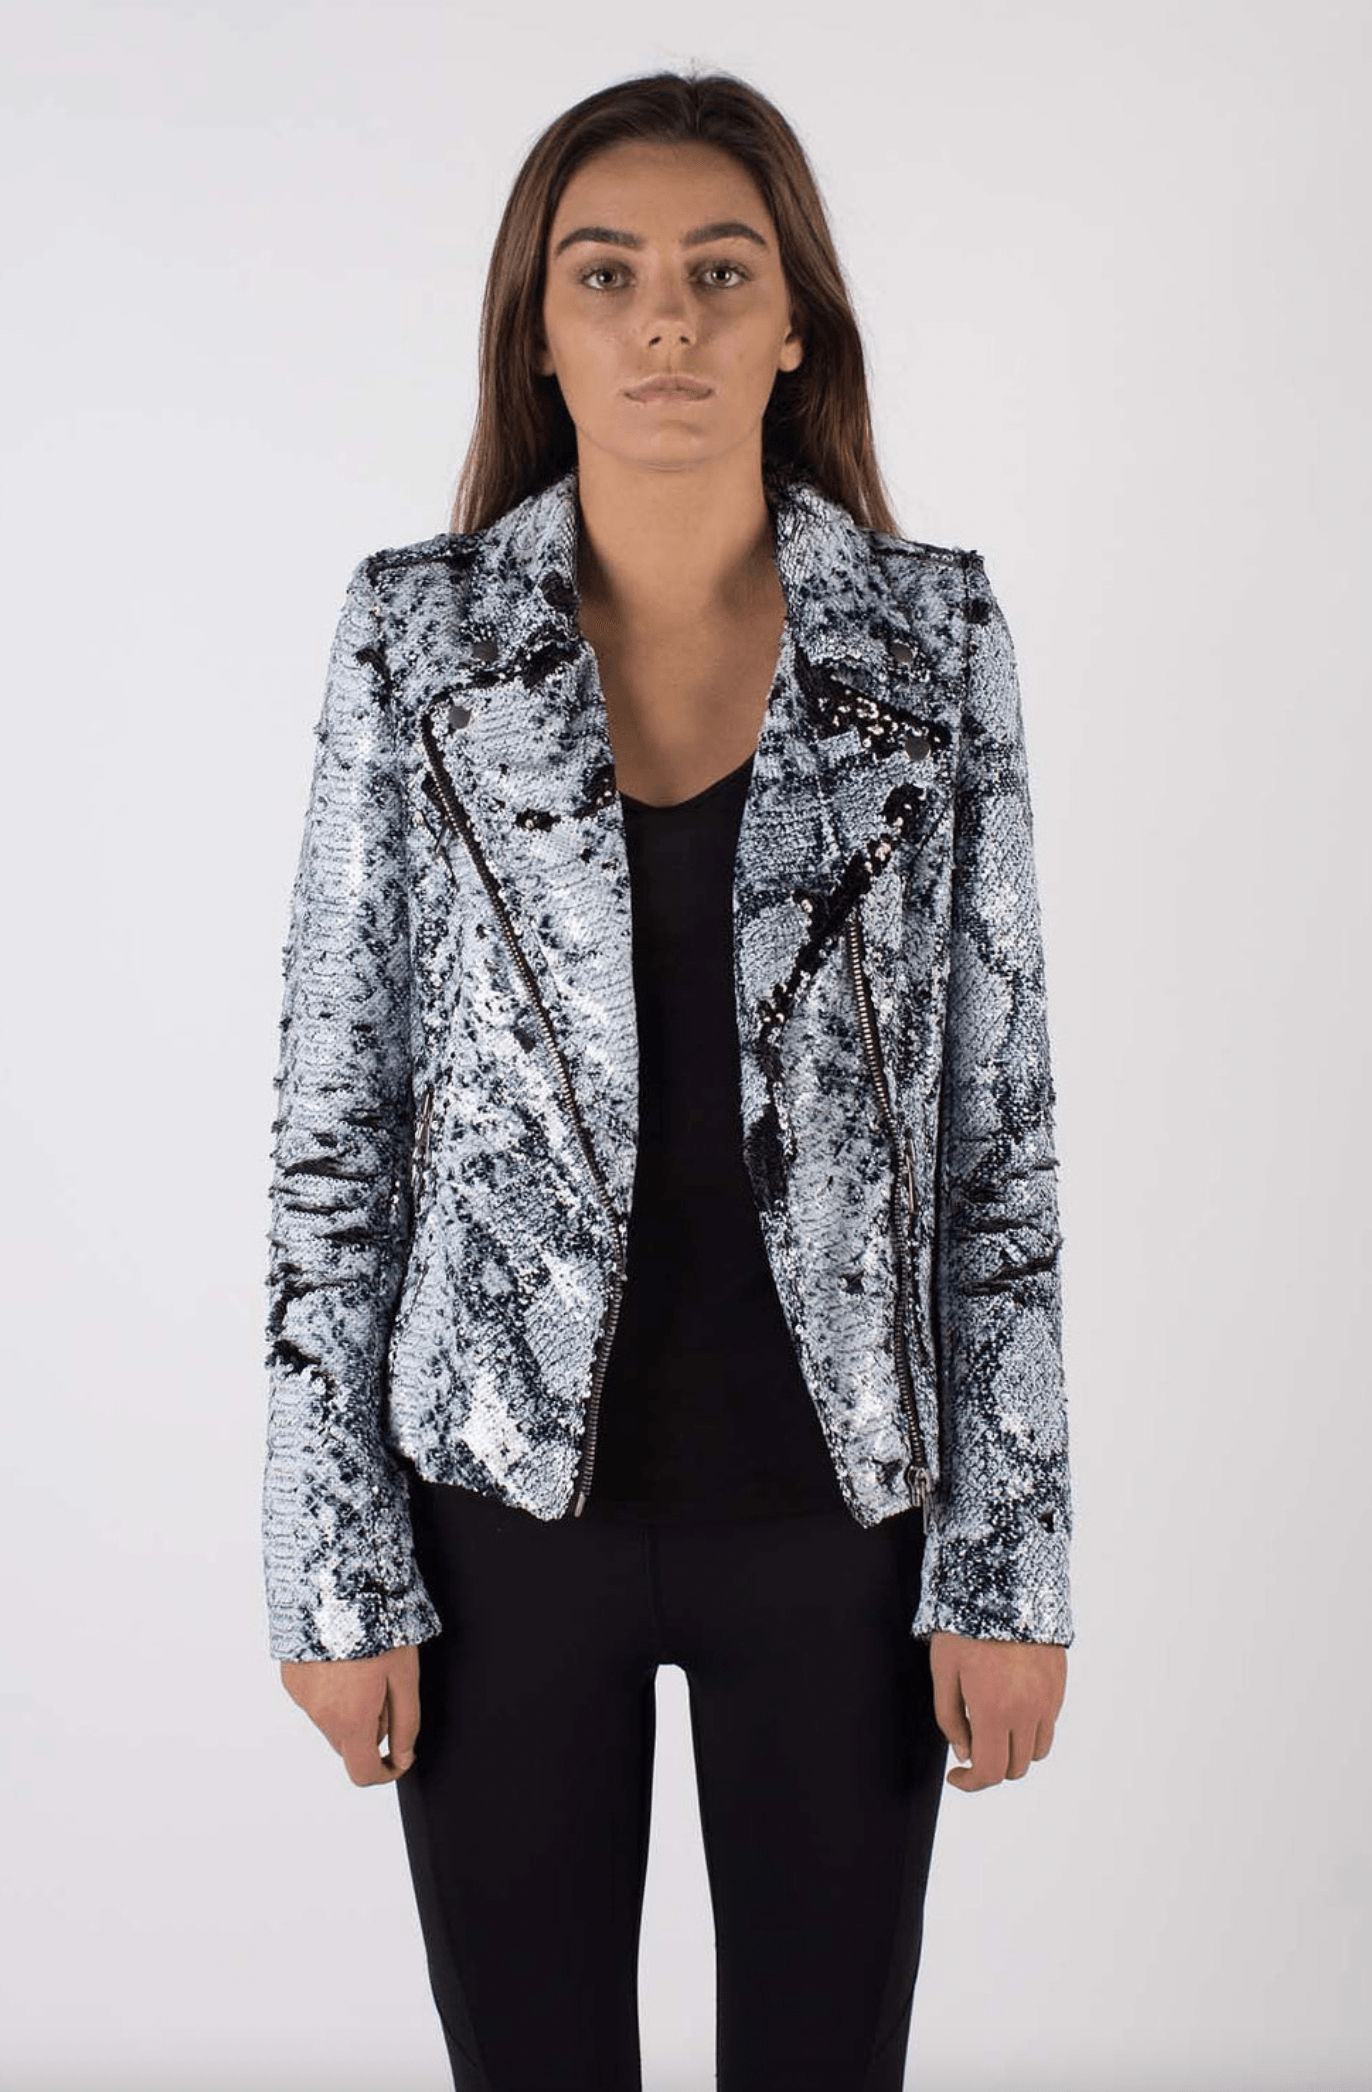 White Snake Sequin Moto Jacket by Any Old Iron - Haven